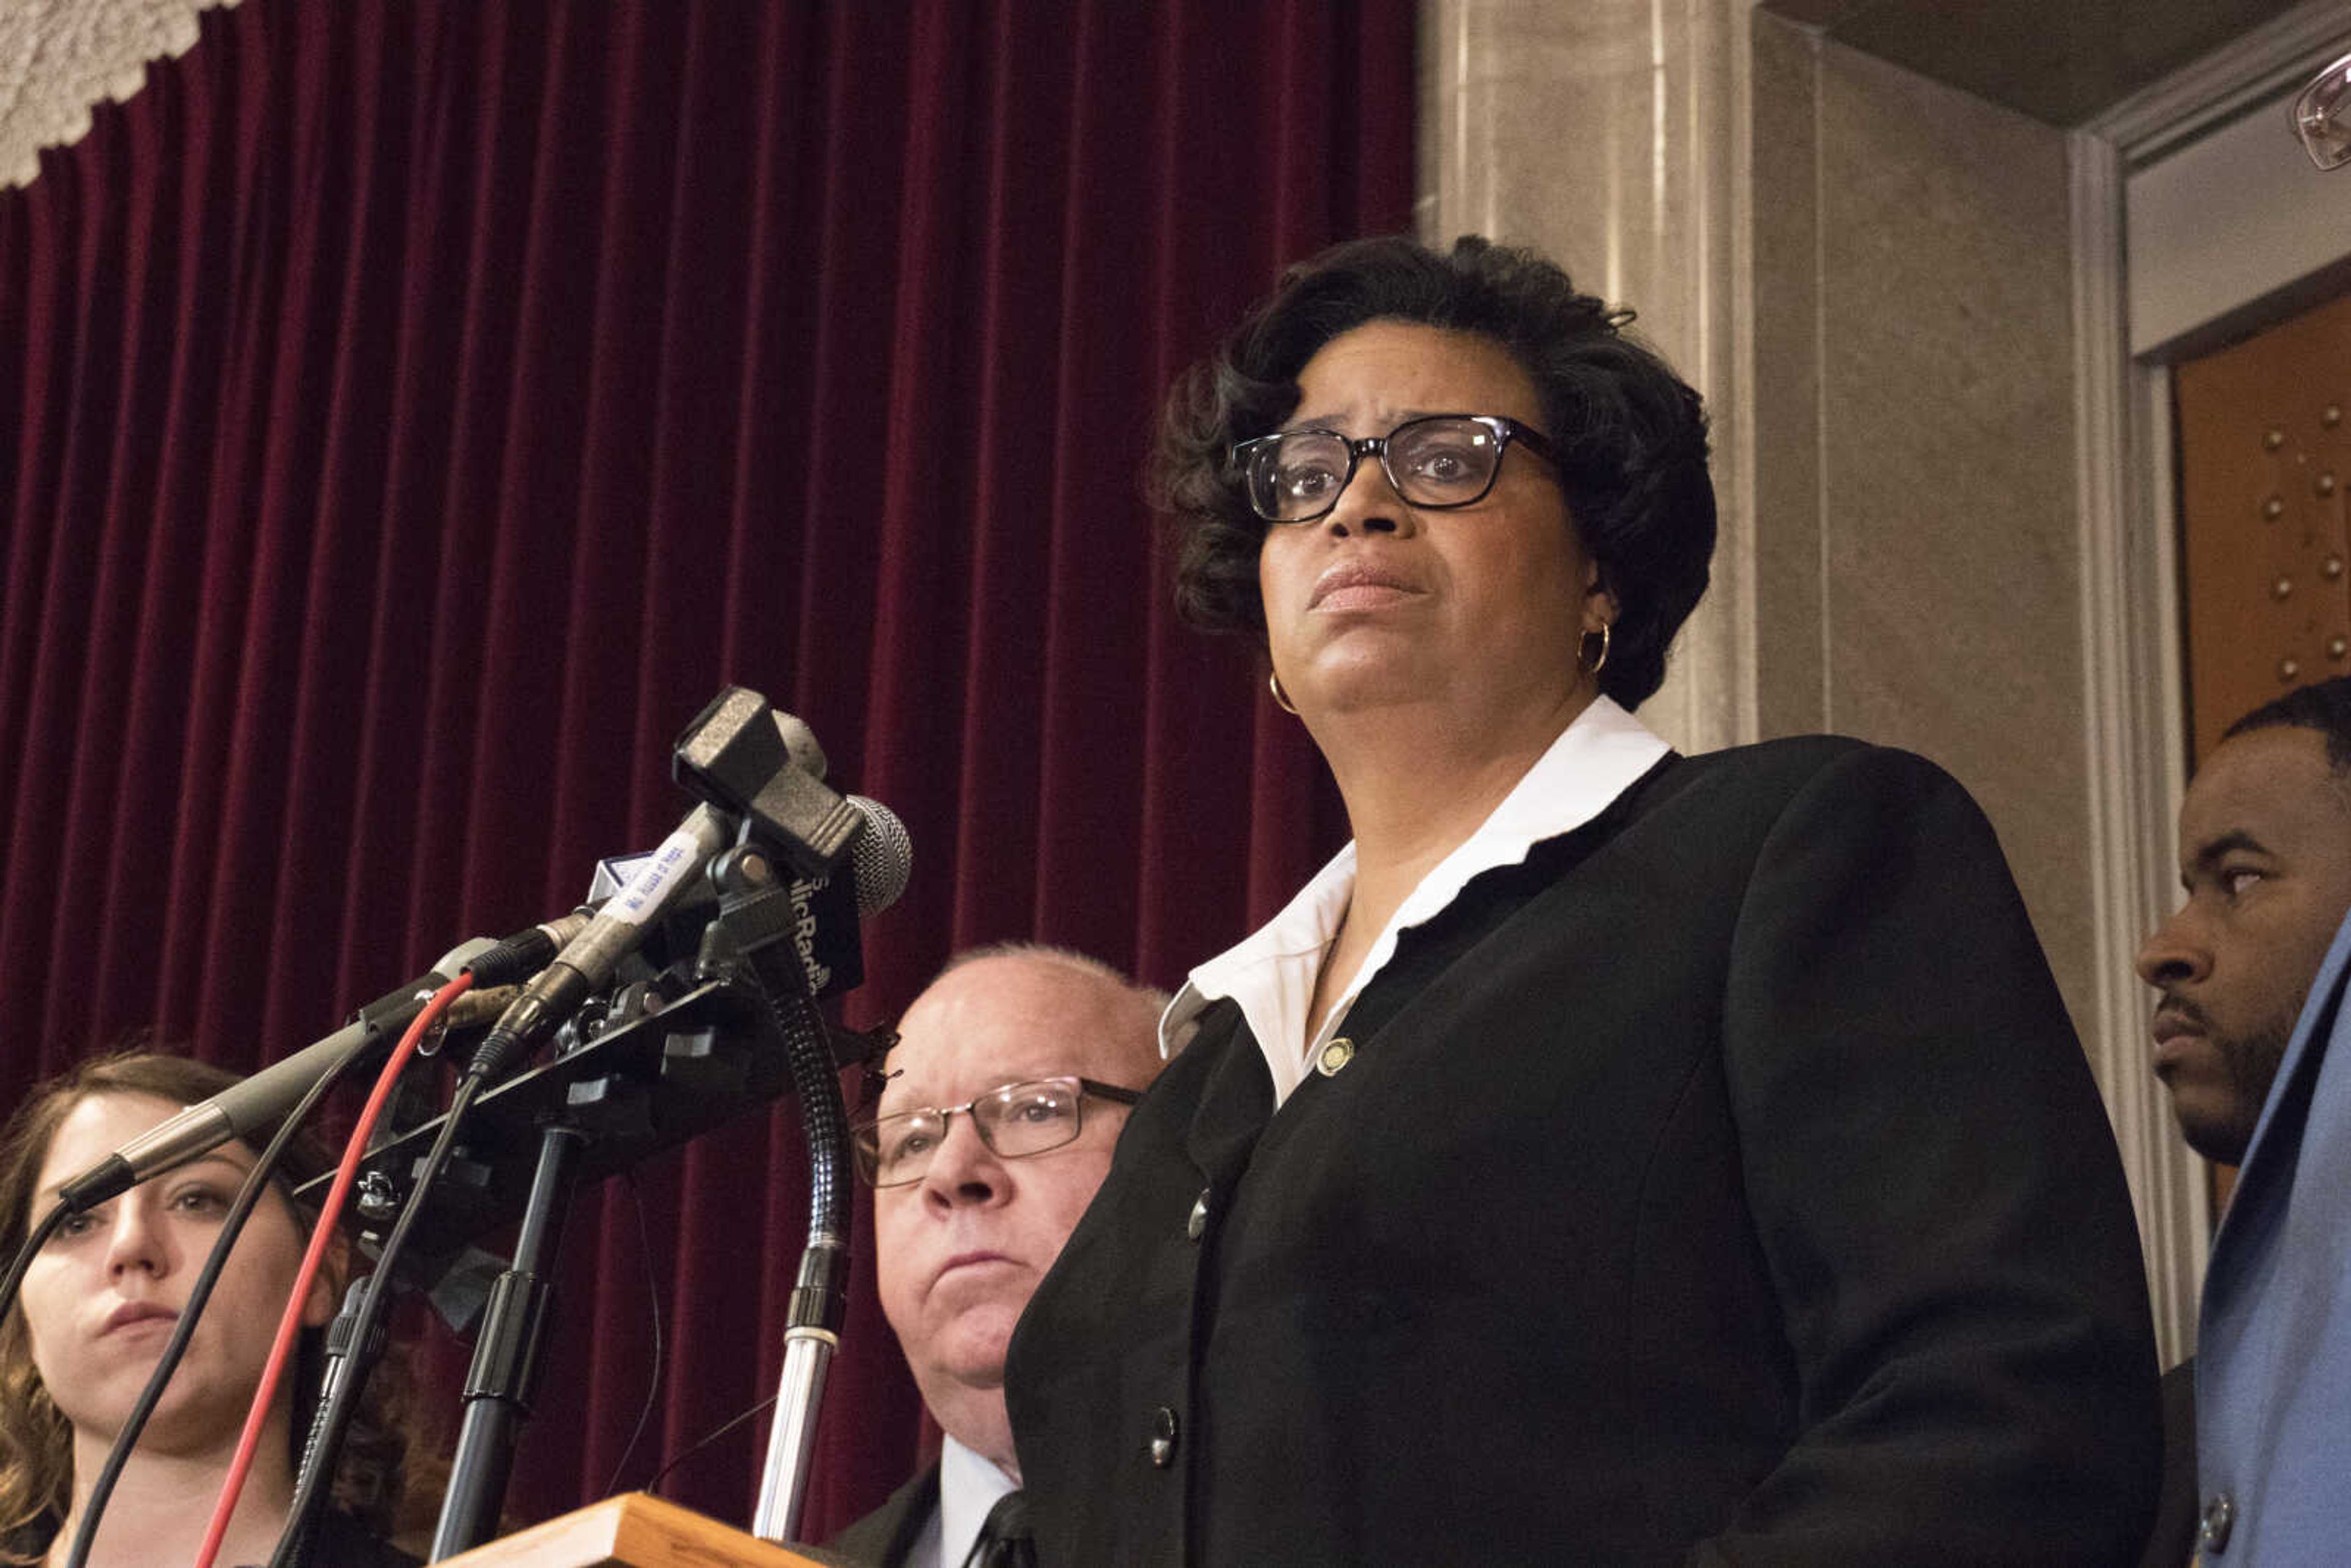 Minority leader Gail McCann Beatty speaks at a press conference to address the findings of the Missouri House of Representatives Special Investigative Committee on Oversight on the House Floor on April 11.